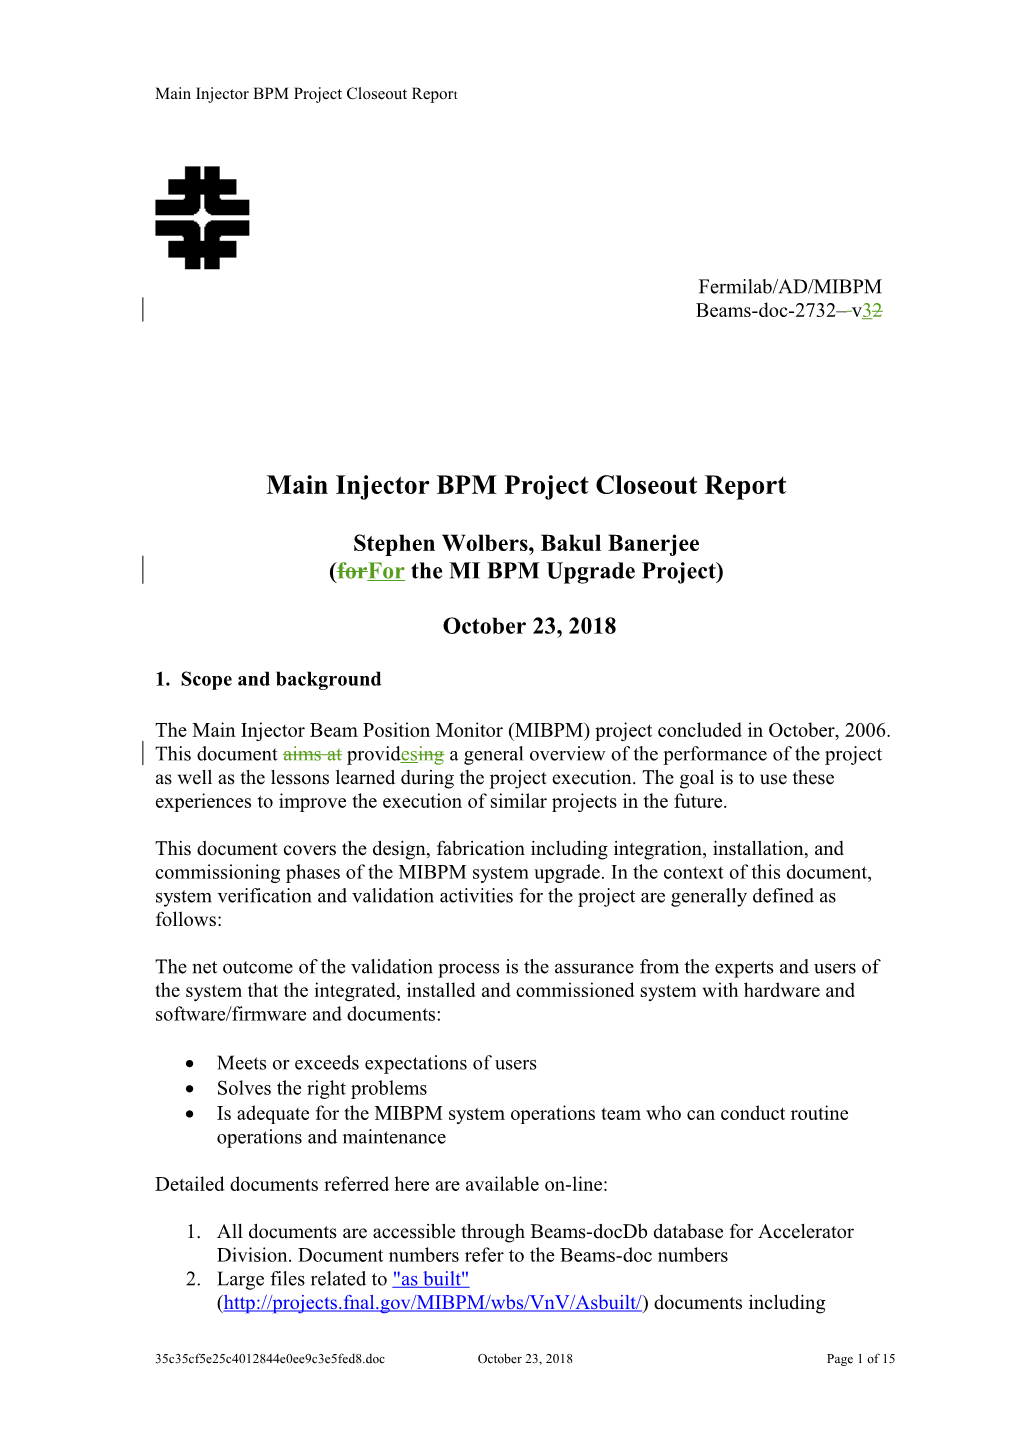 Main Injector BPM Project Closeout Report